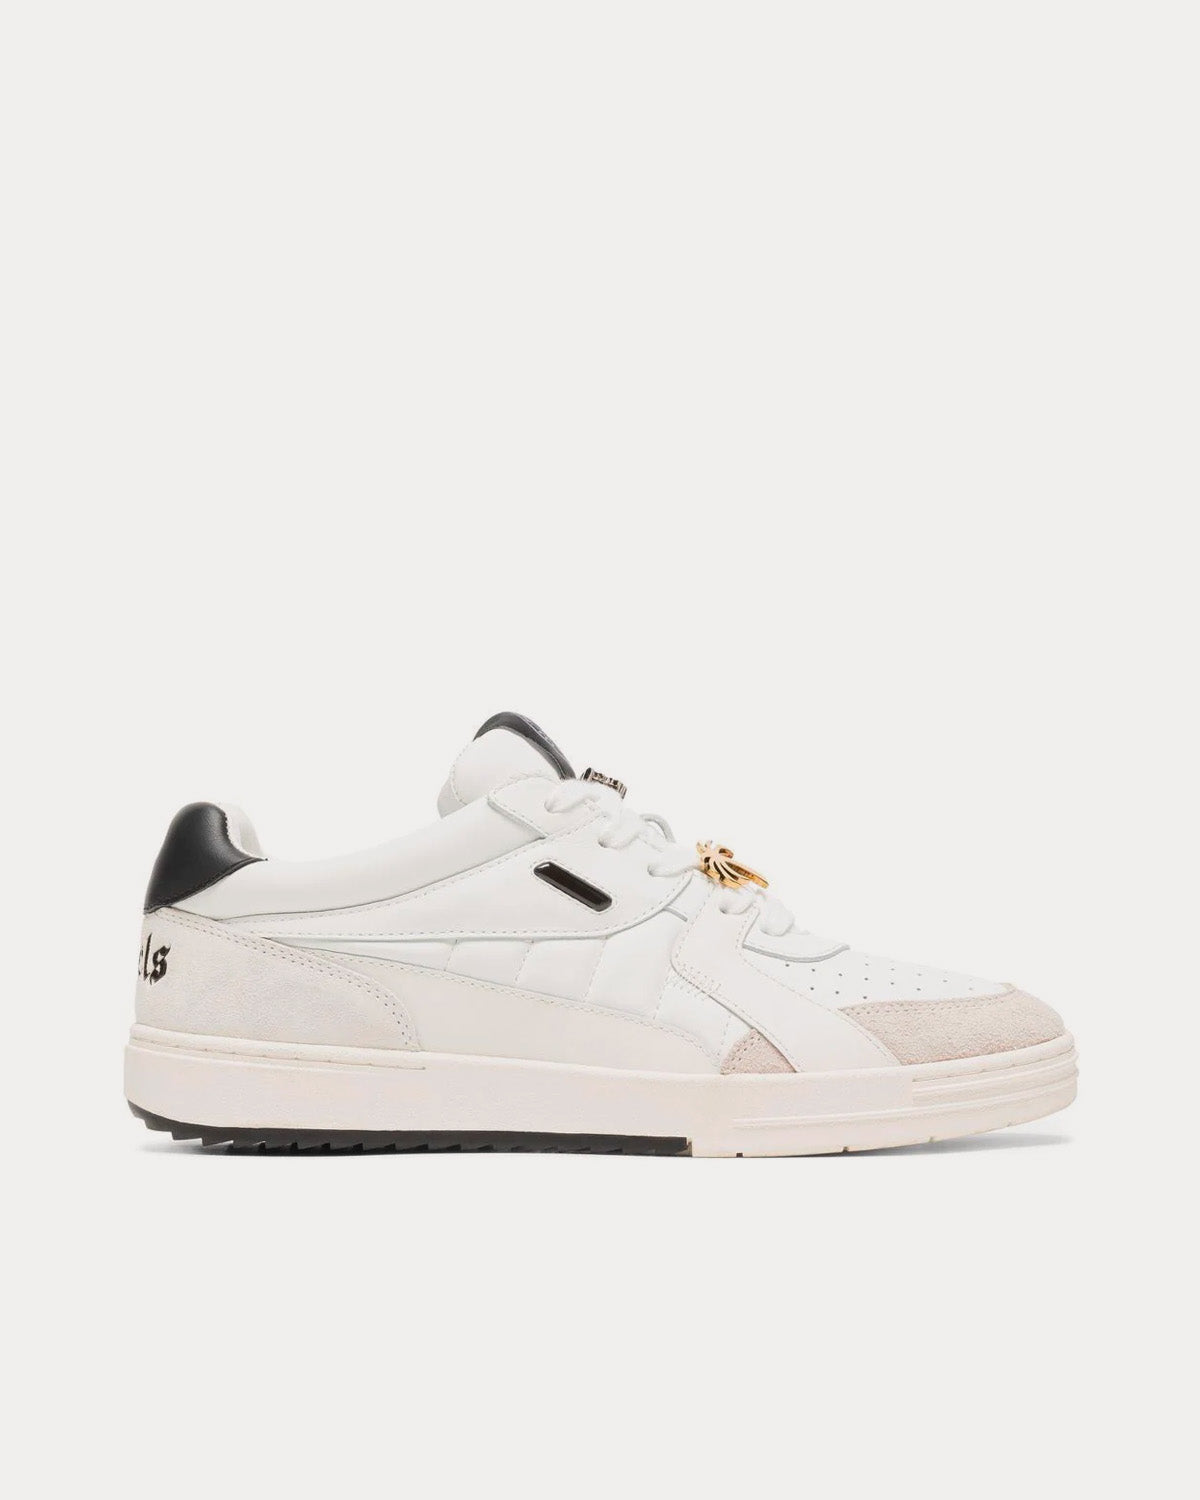 Palm Angels - University 'BEAT' White / Black Low Top Sneakers